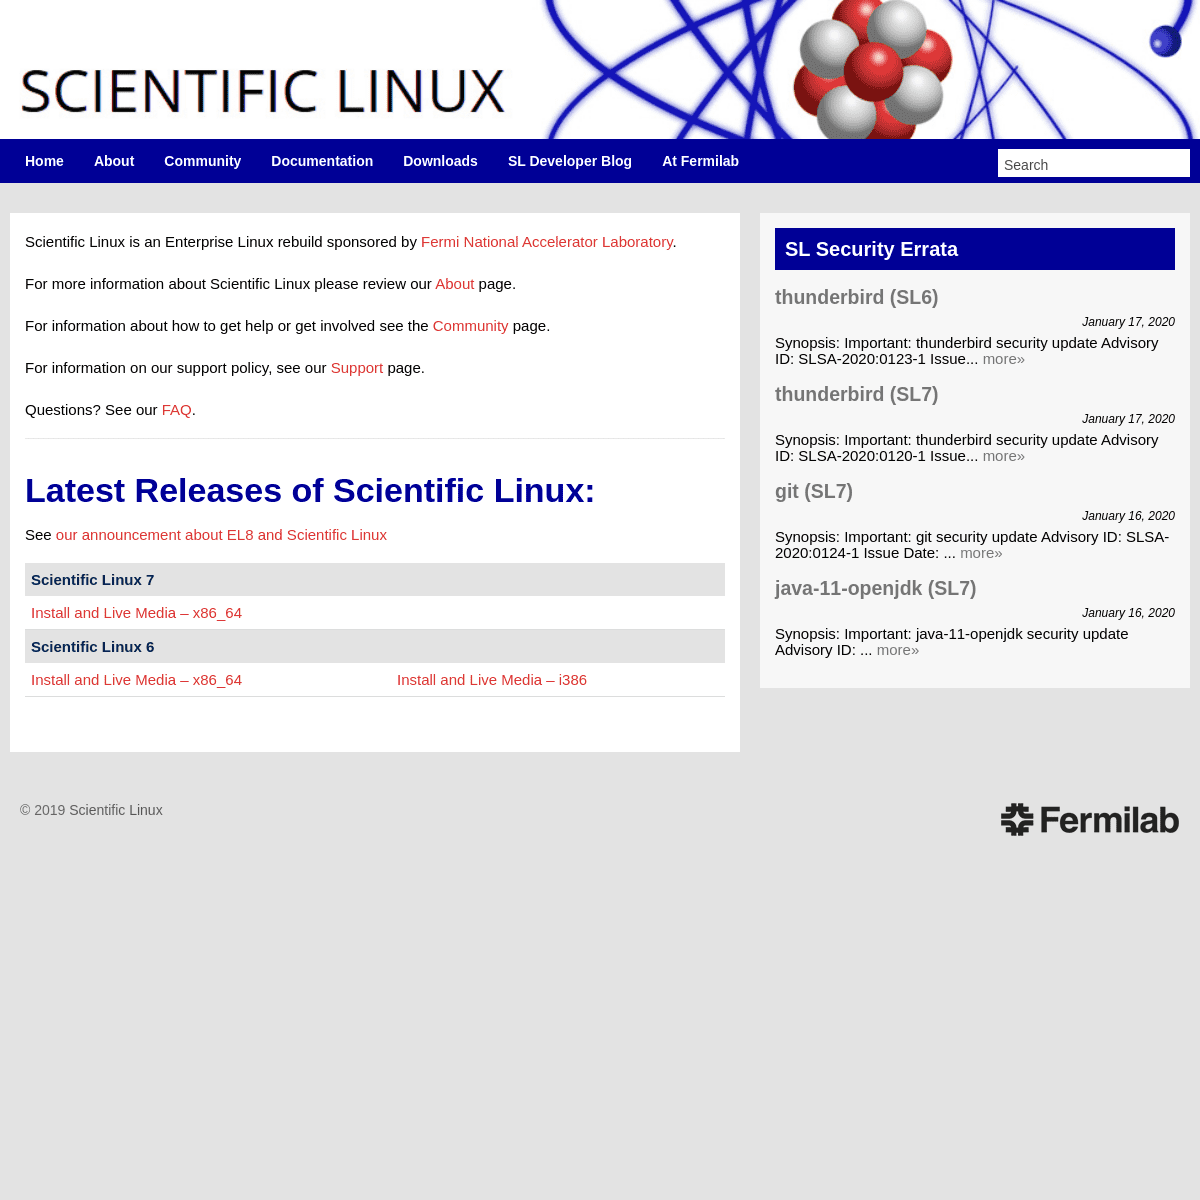 A complete backup of scientificlinux.org